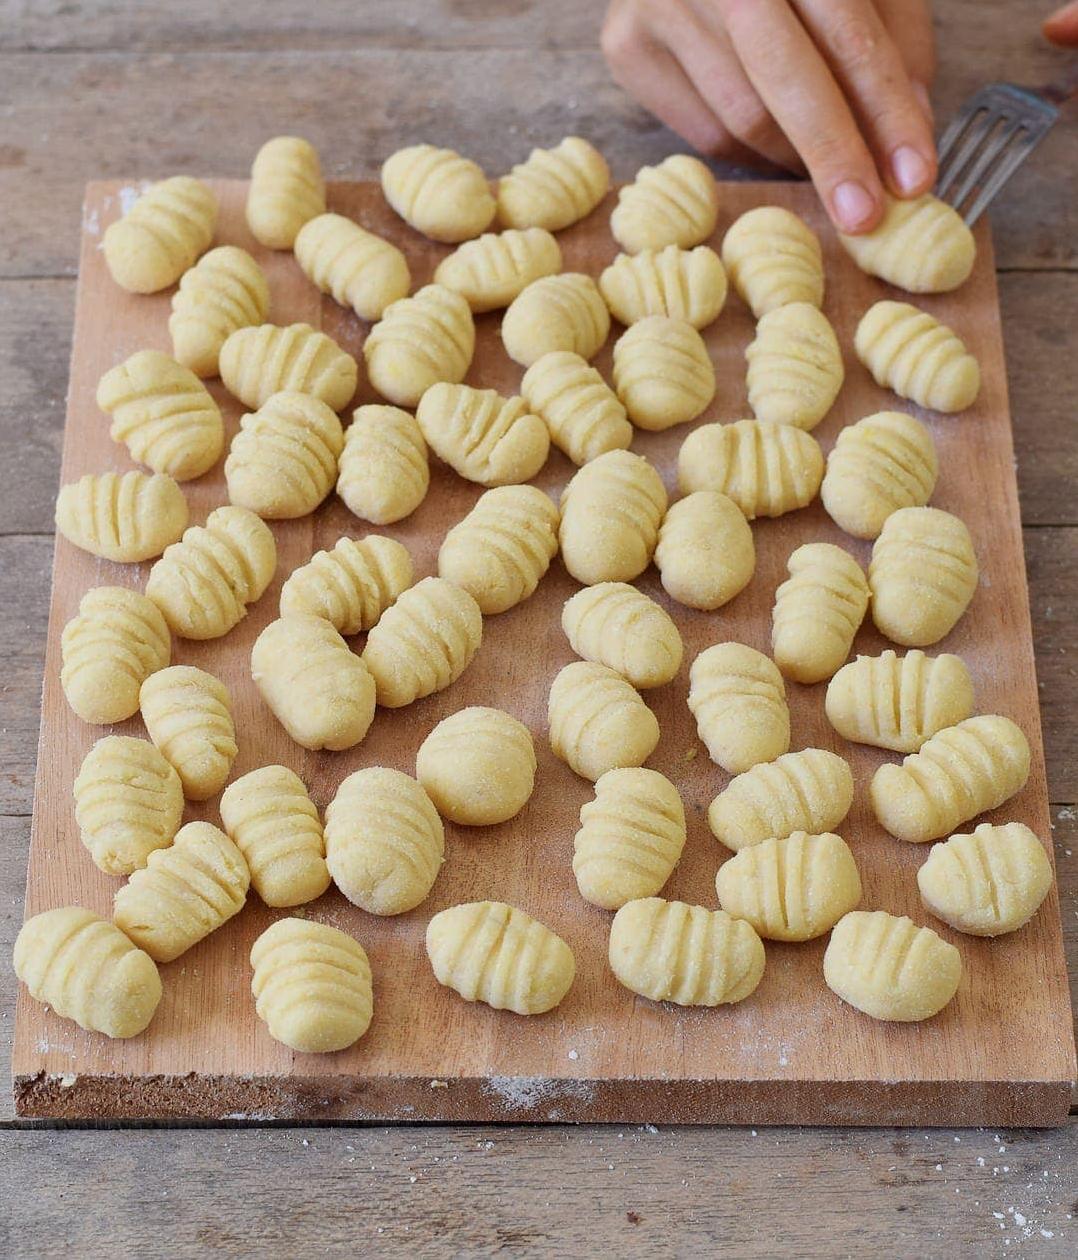  Pillowy soft and gluten-free, these gnocchi melt in your mouth!